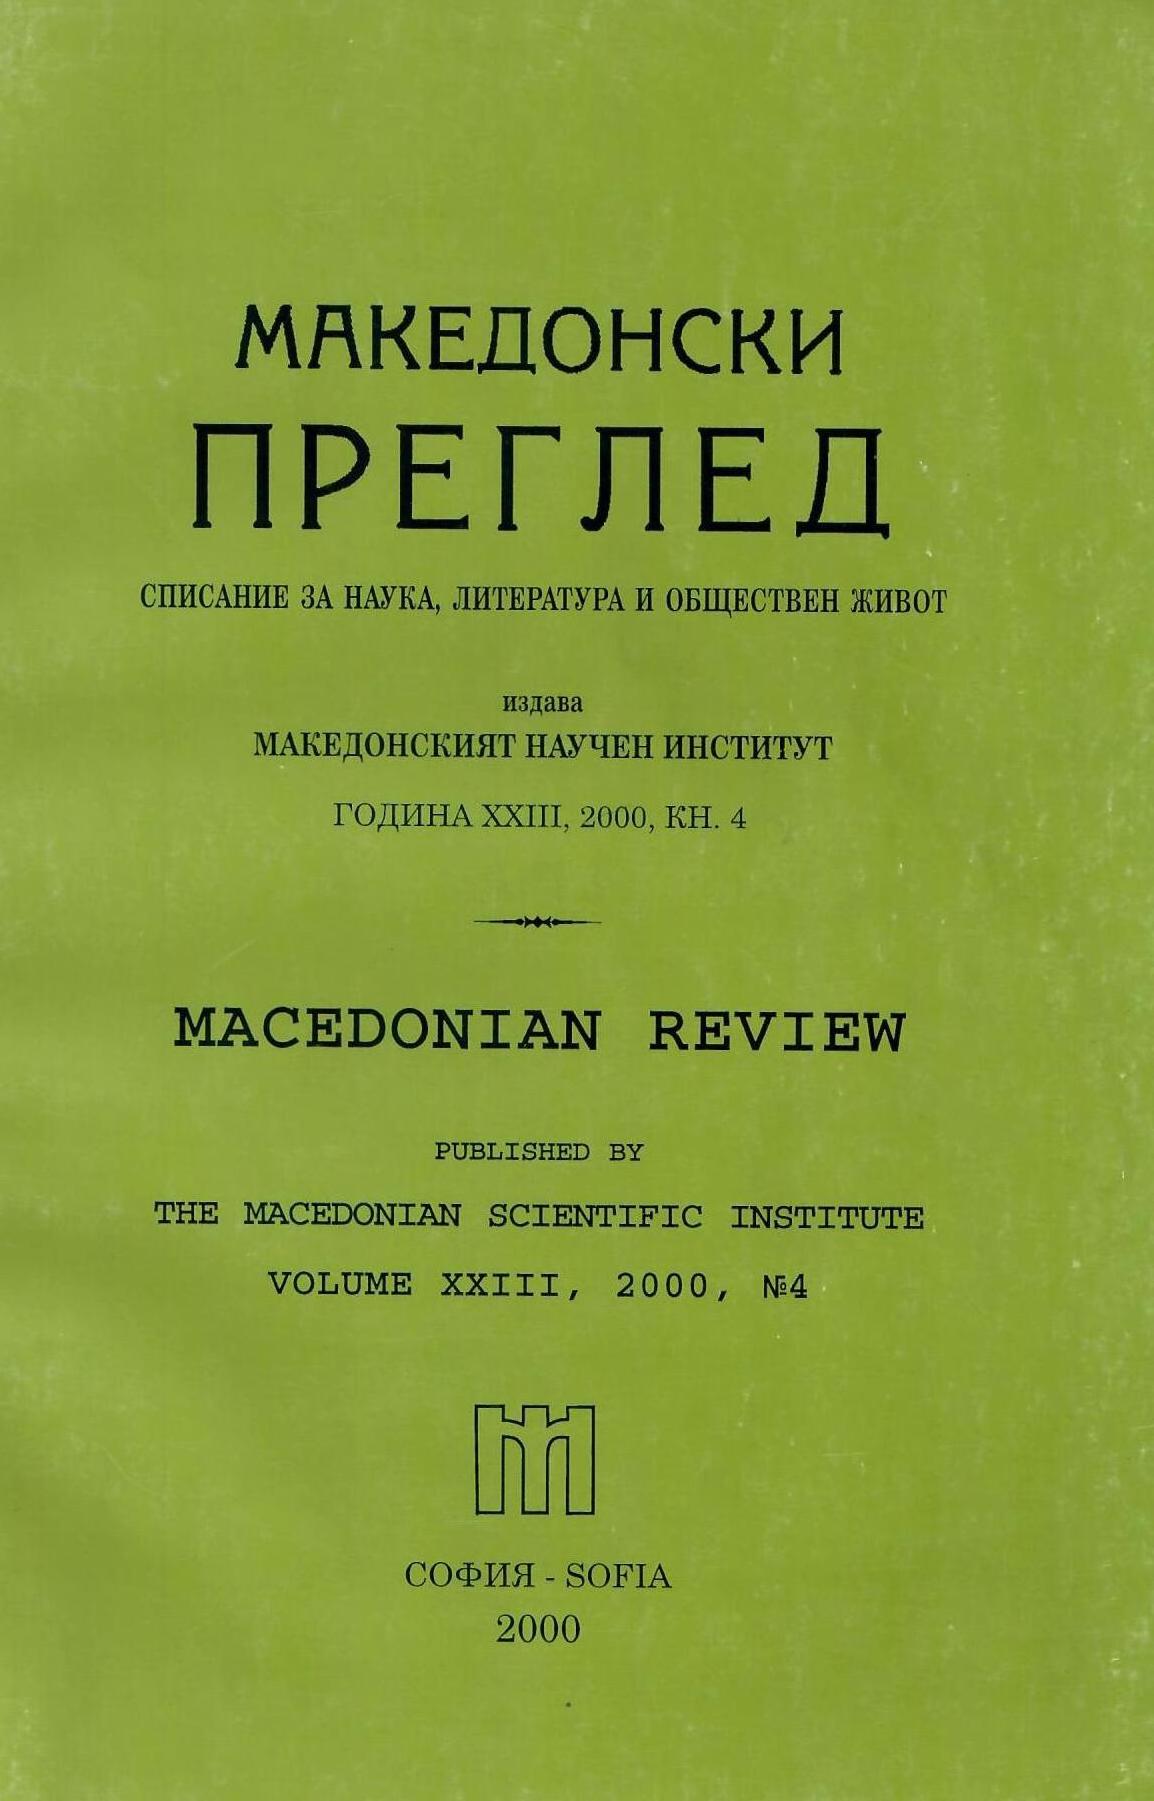 A New Through Research of the Macedonian Academy of Science Cover Image